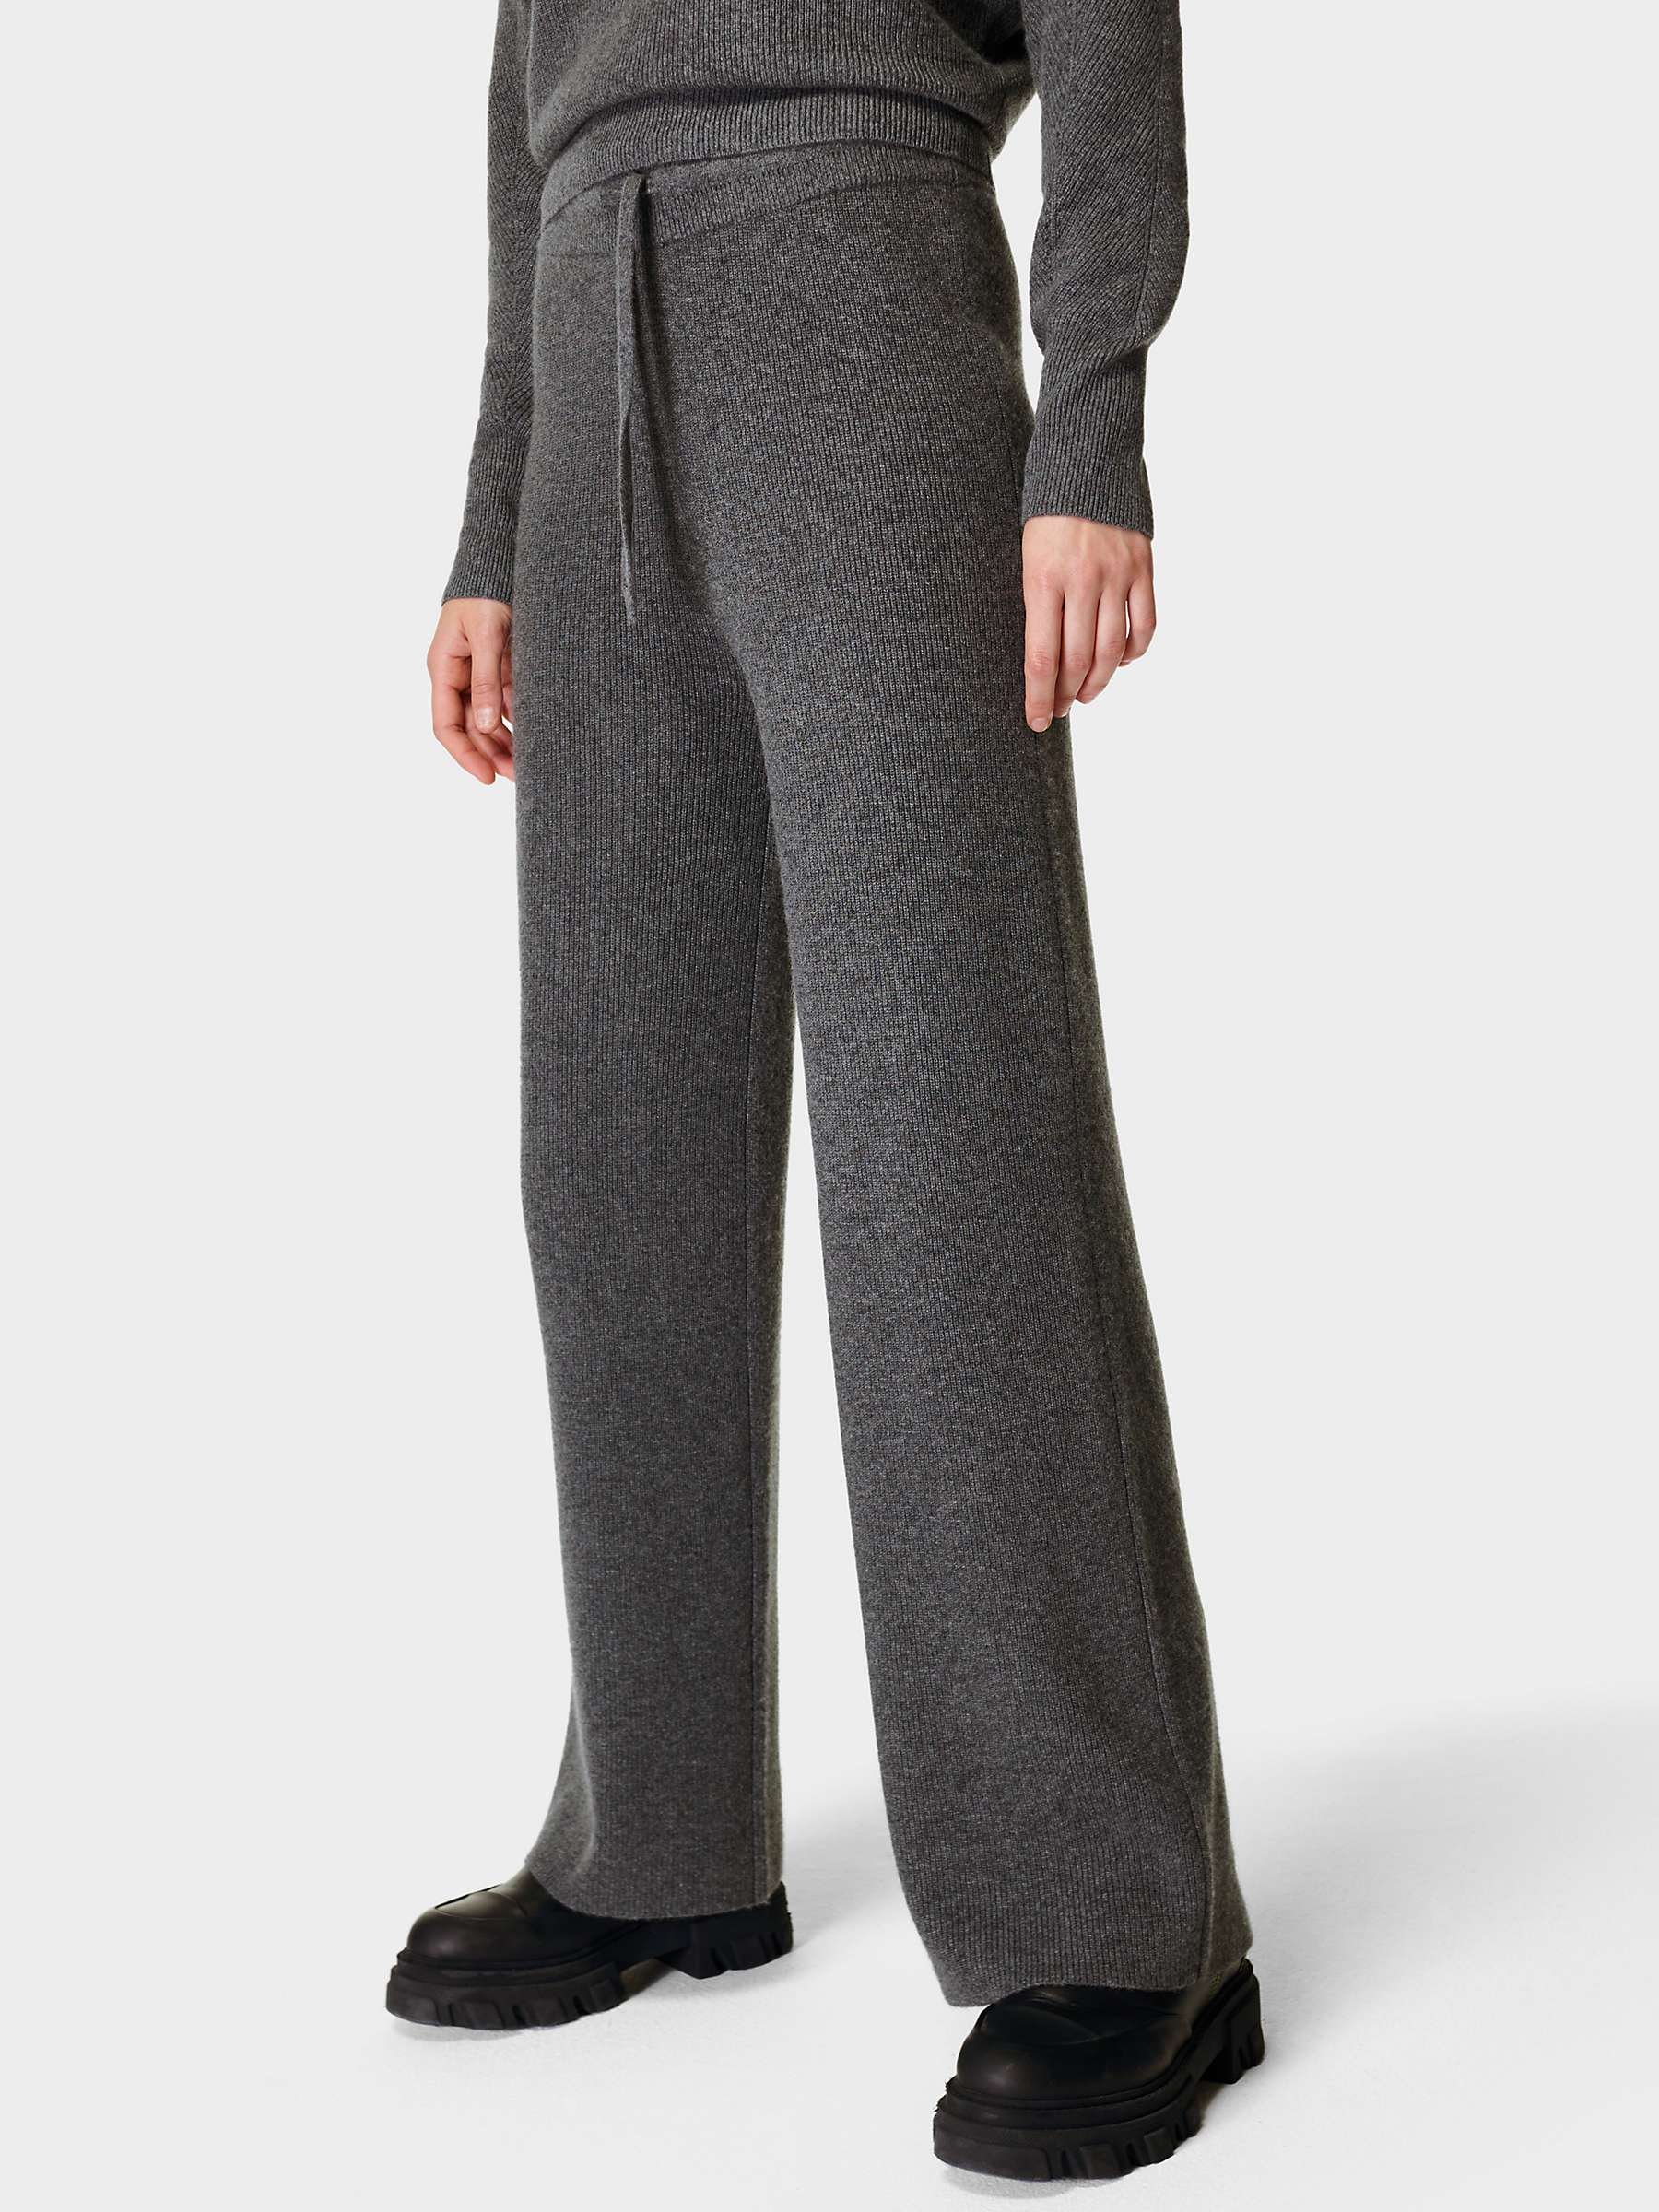 Sweaty Betty Relax Cashmere Lounge Trousers, Pumice Grey at John Lewis ...